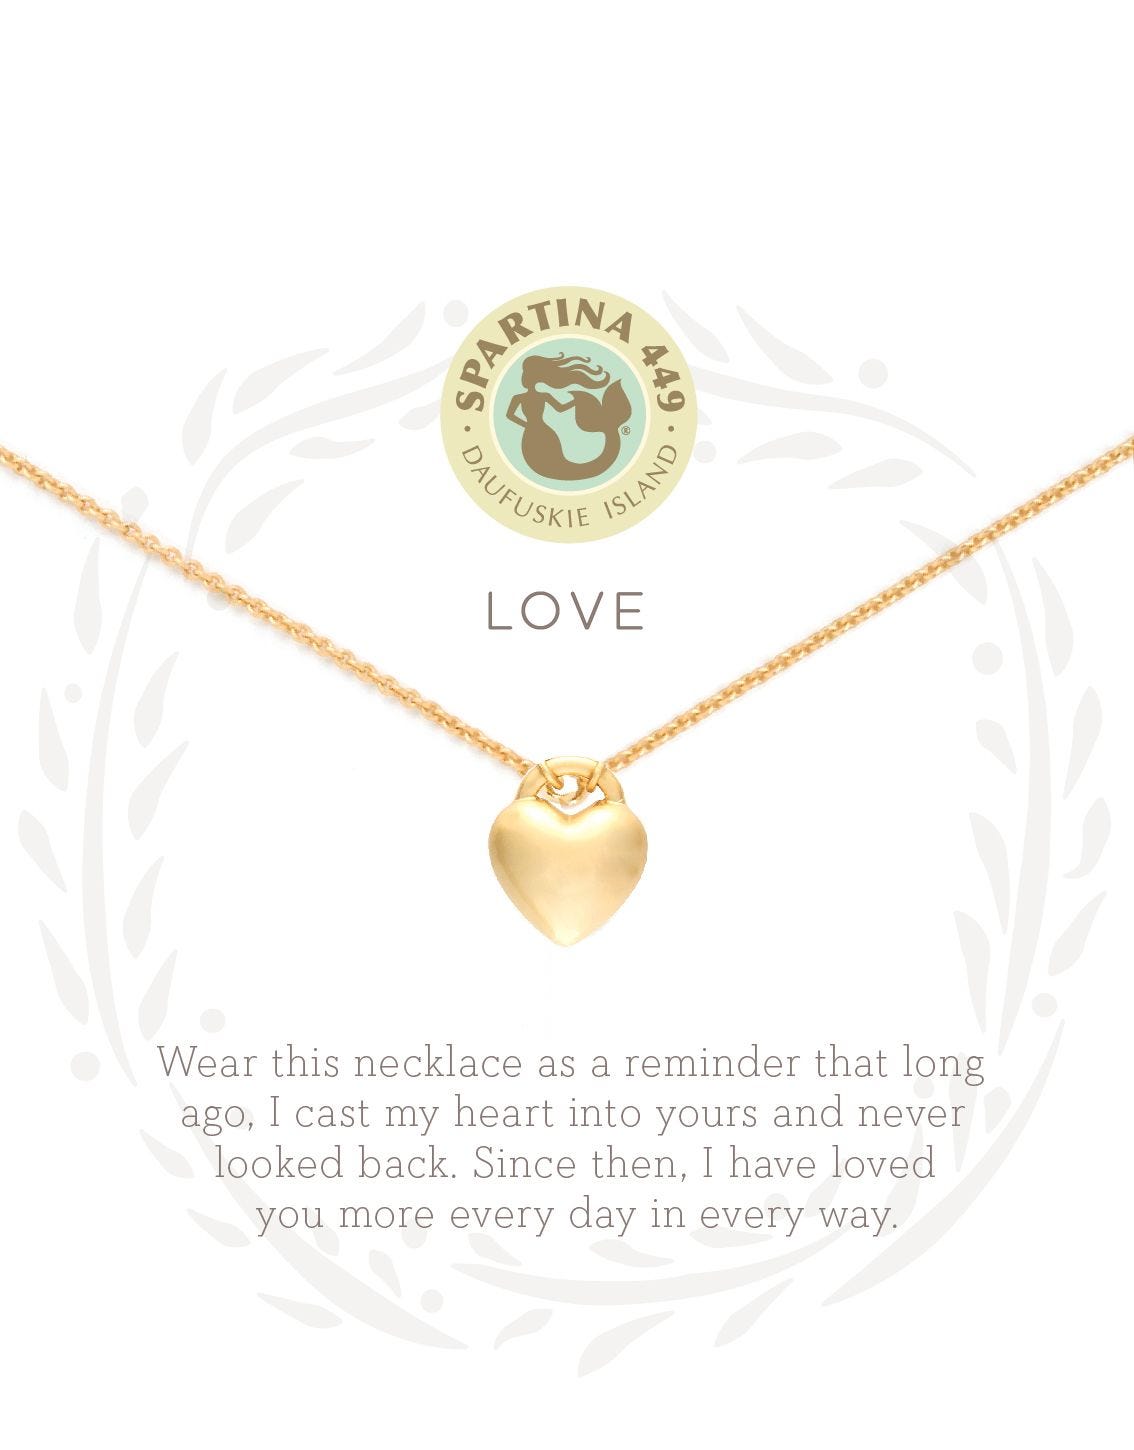 Love Heart Gold Necklace - Jewelry - SierraLily